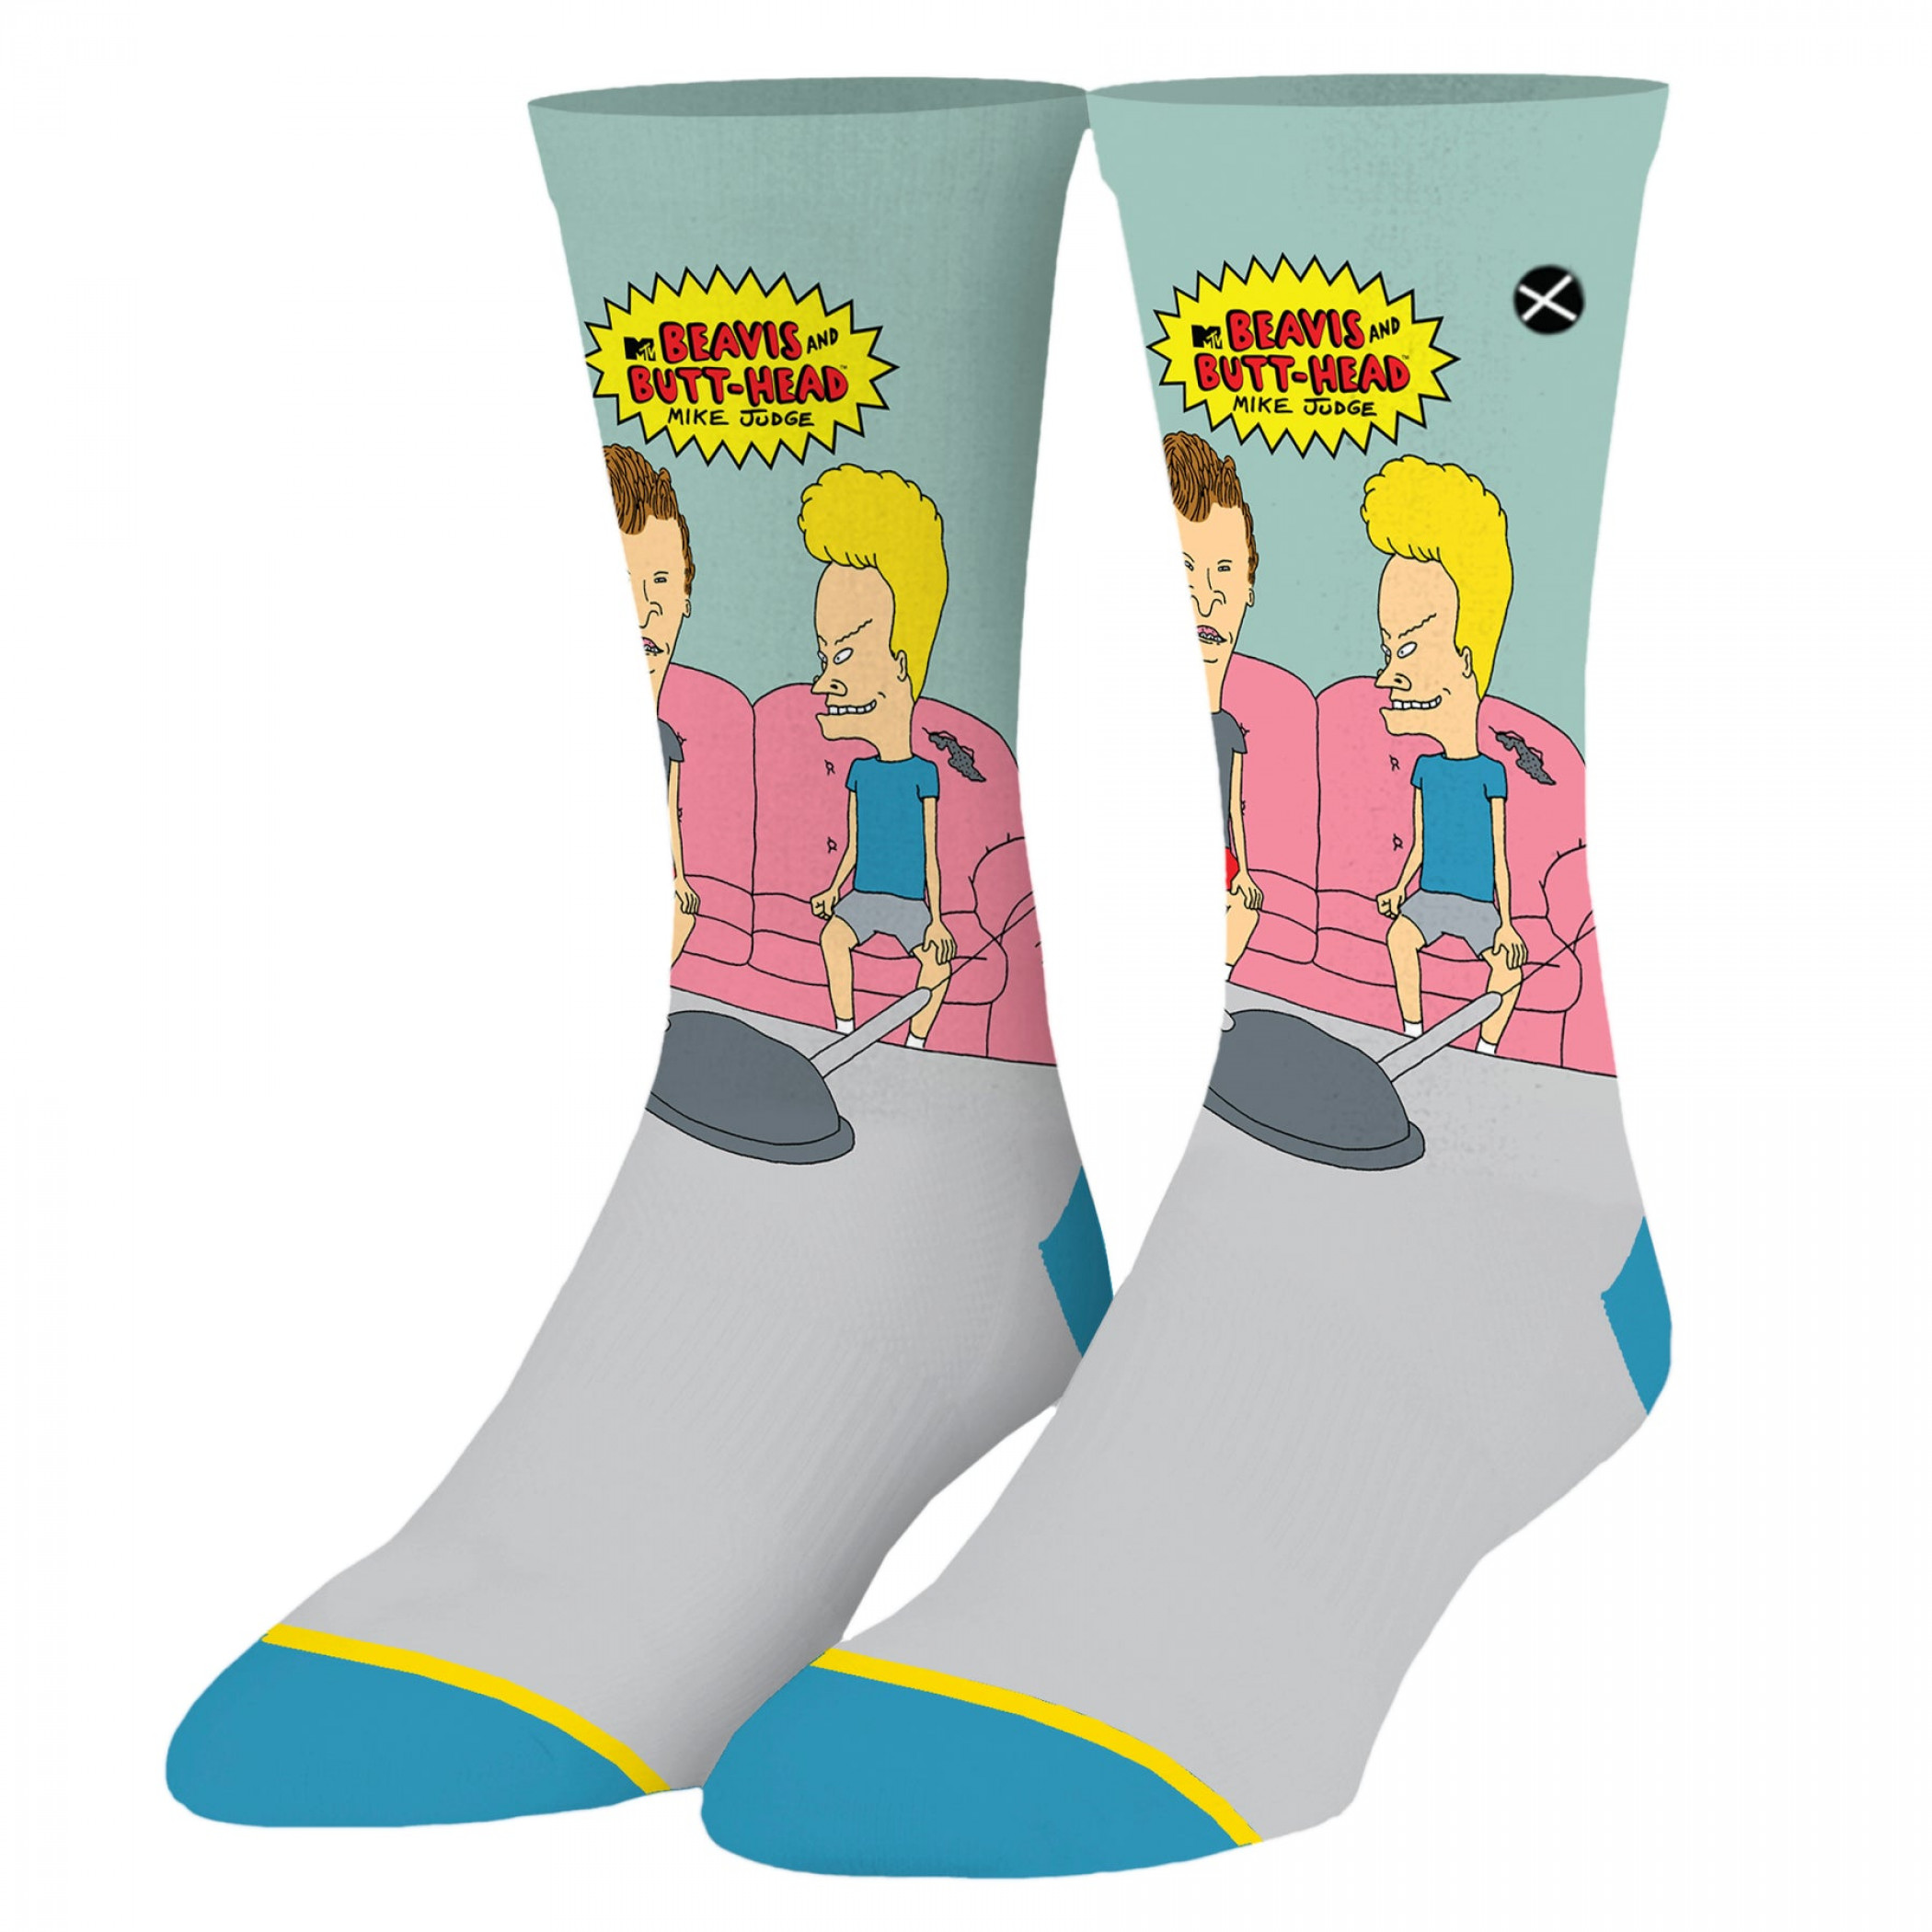 Beavis and Butt-Head Couch Sitting Crew Socks